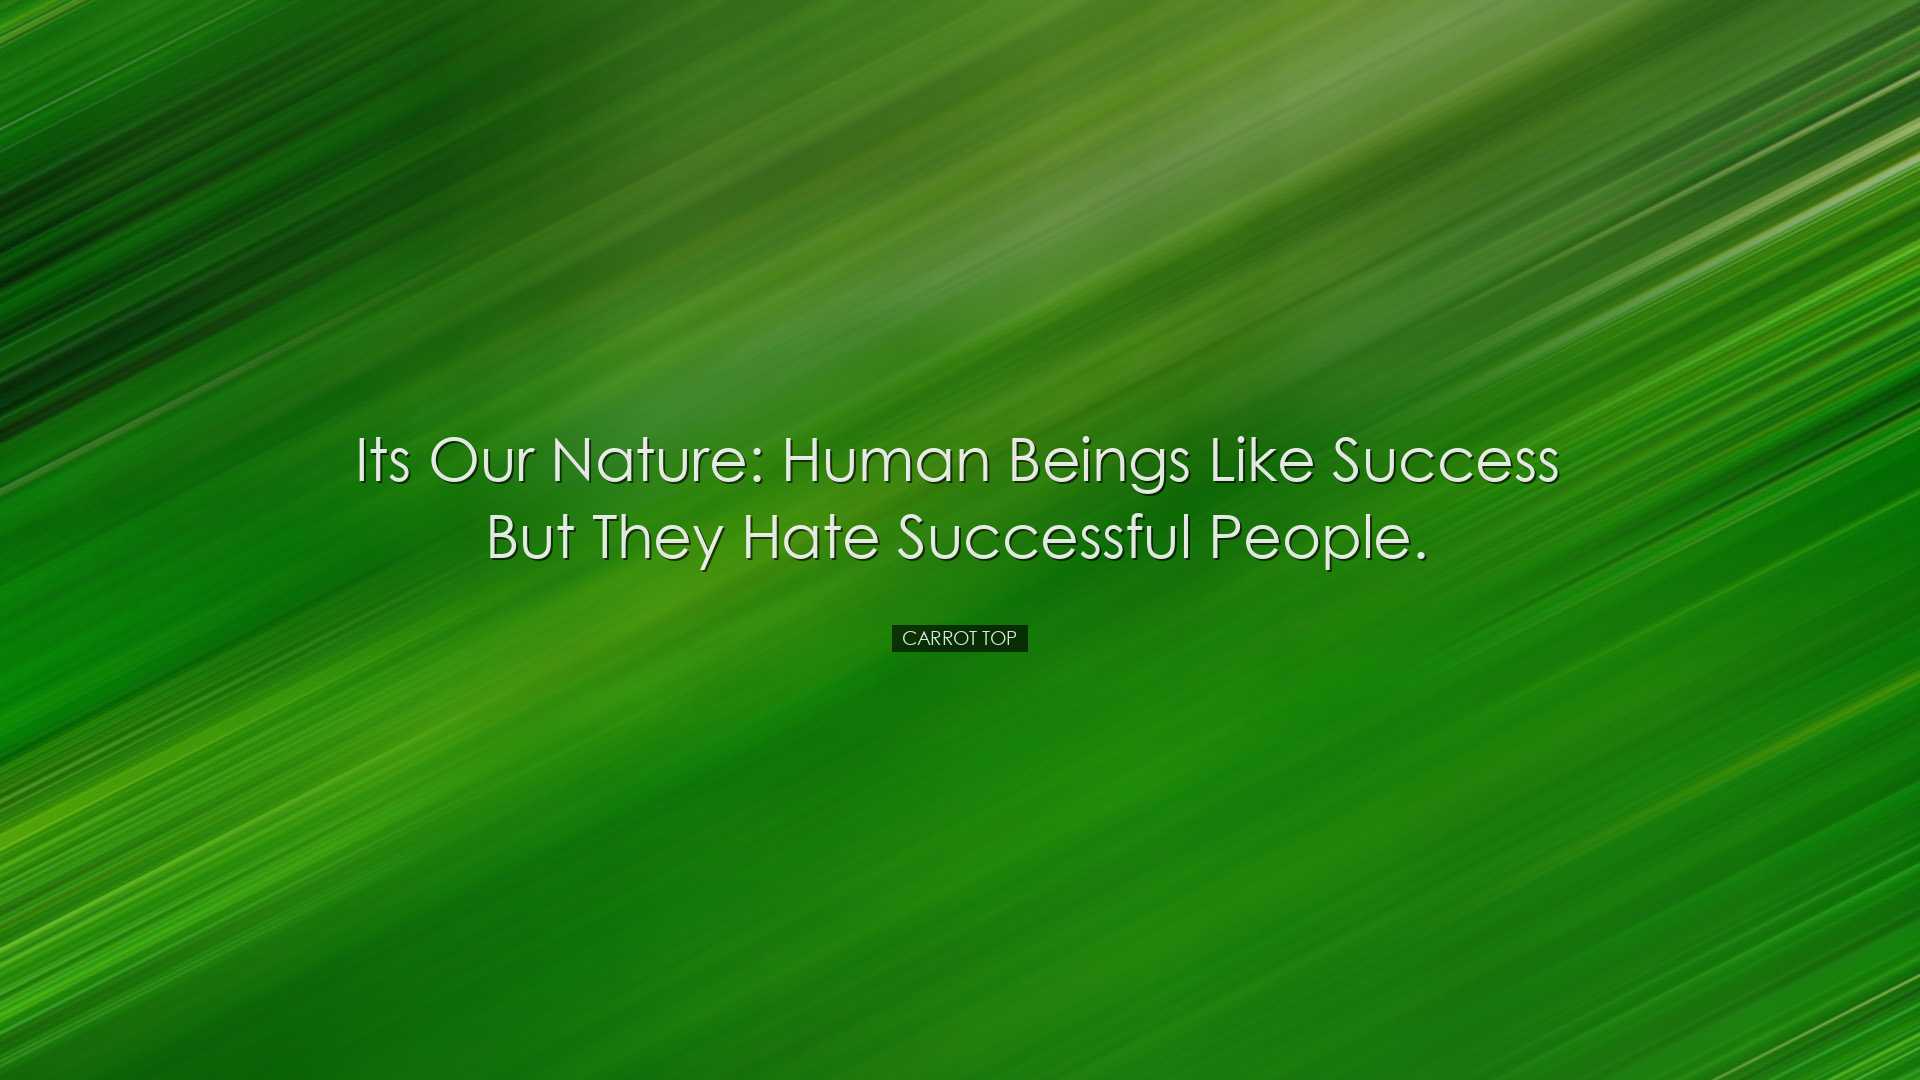 Its our nature: Human beings like success but they hate successful